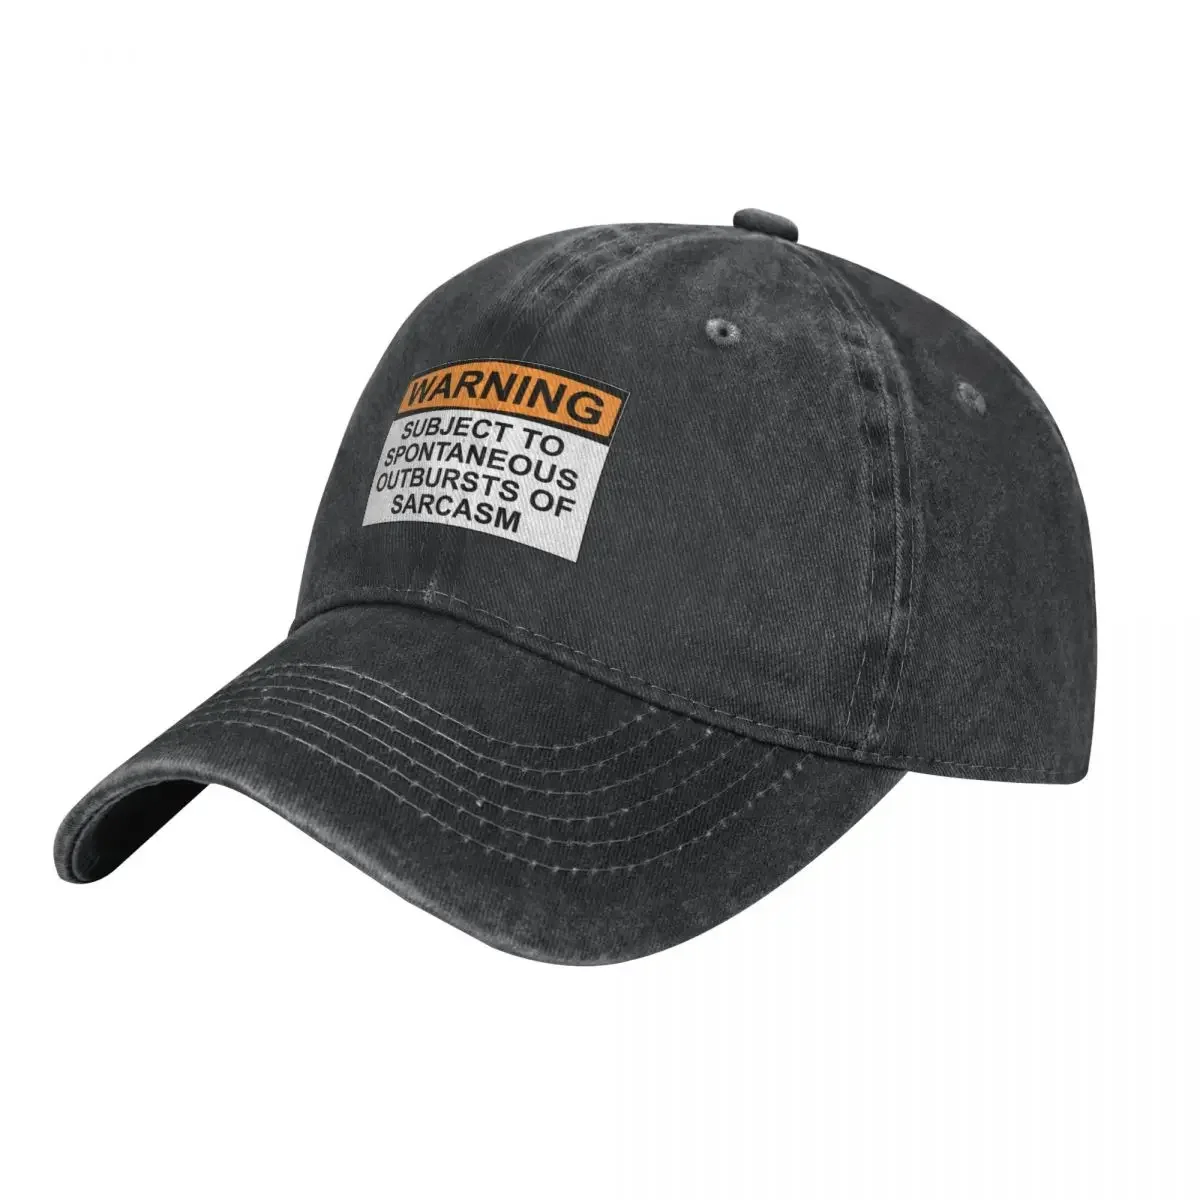 

WARNING: SUBJECT TO SPONTANEOUS OUTBURSTS OF SARCASM Cowboy Hat New Hat Hat Baseball Cap Man For The Sun Boy Child Women's